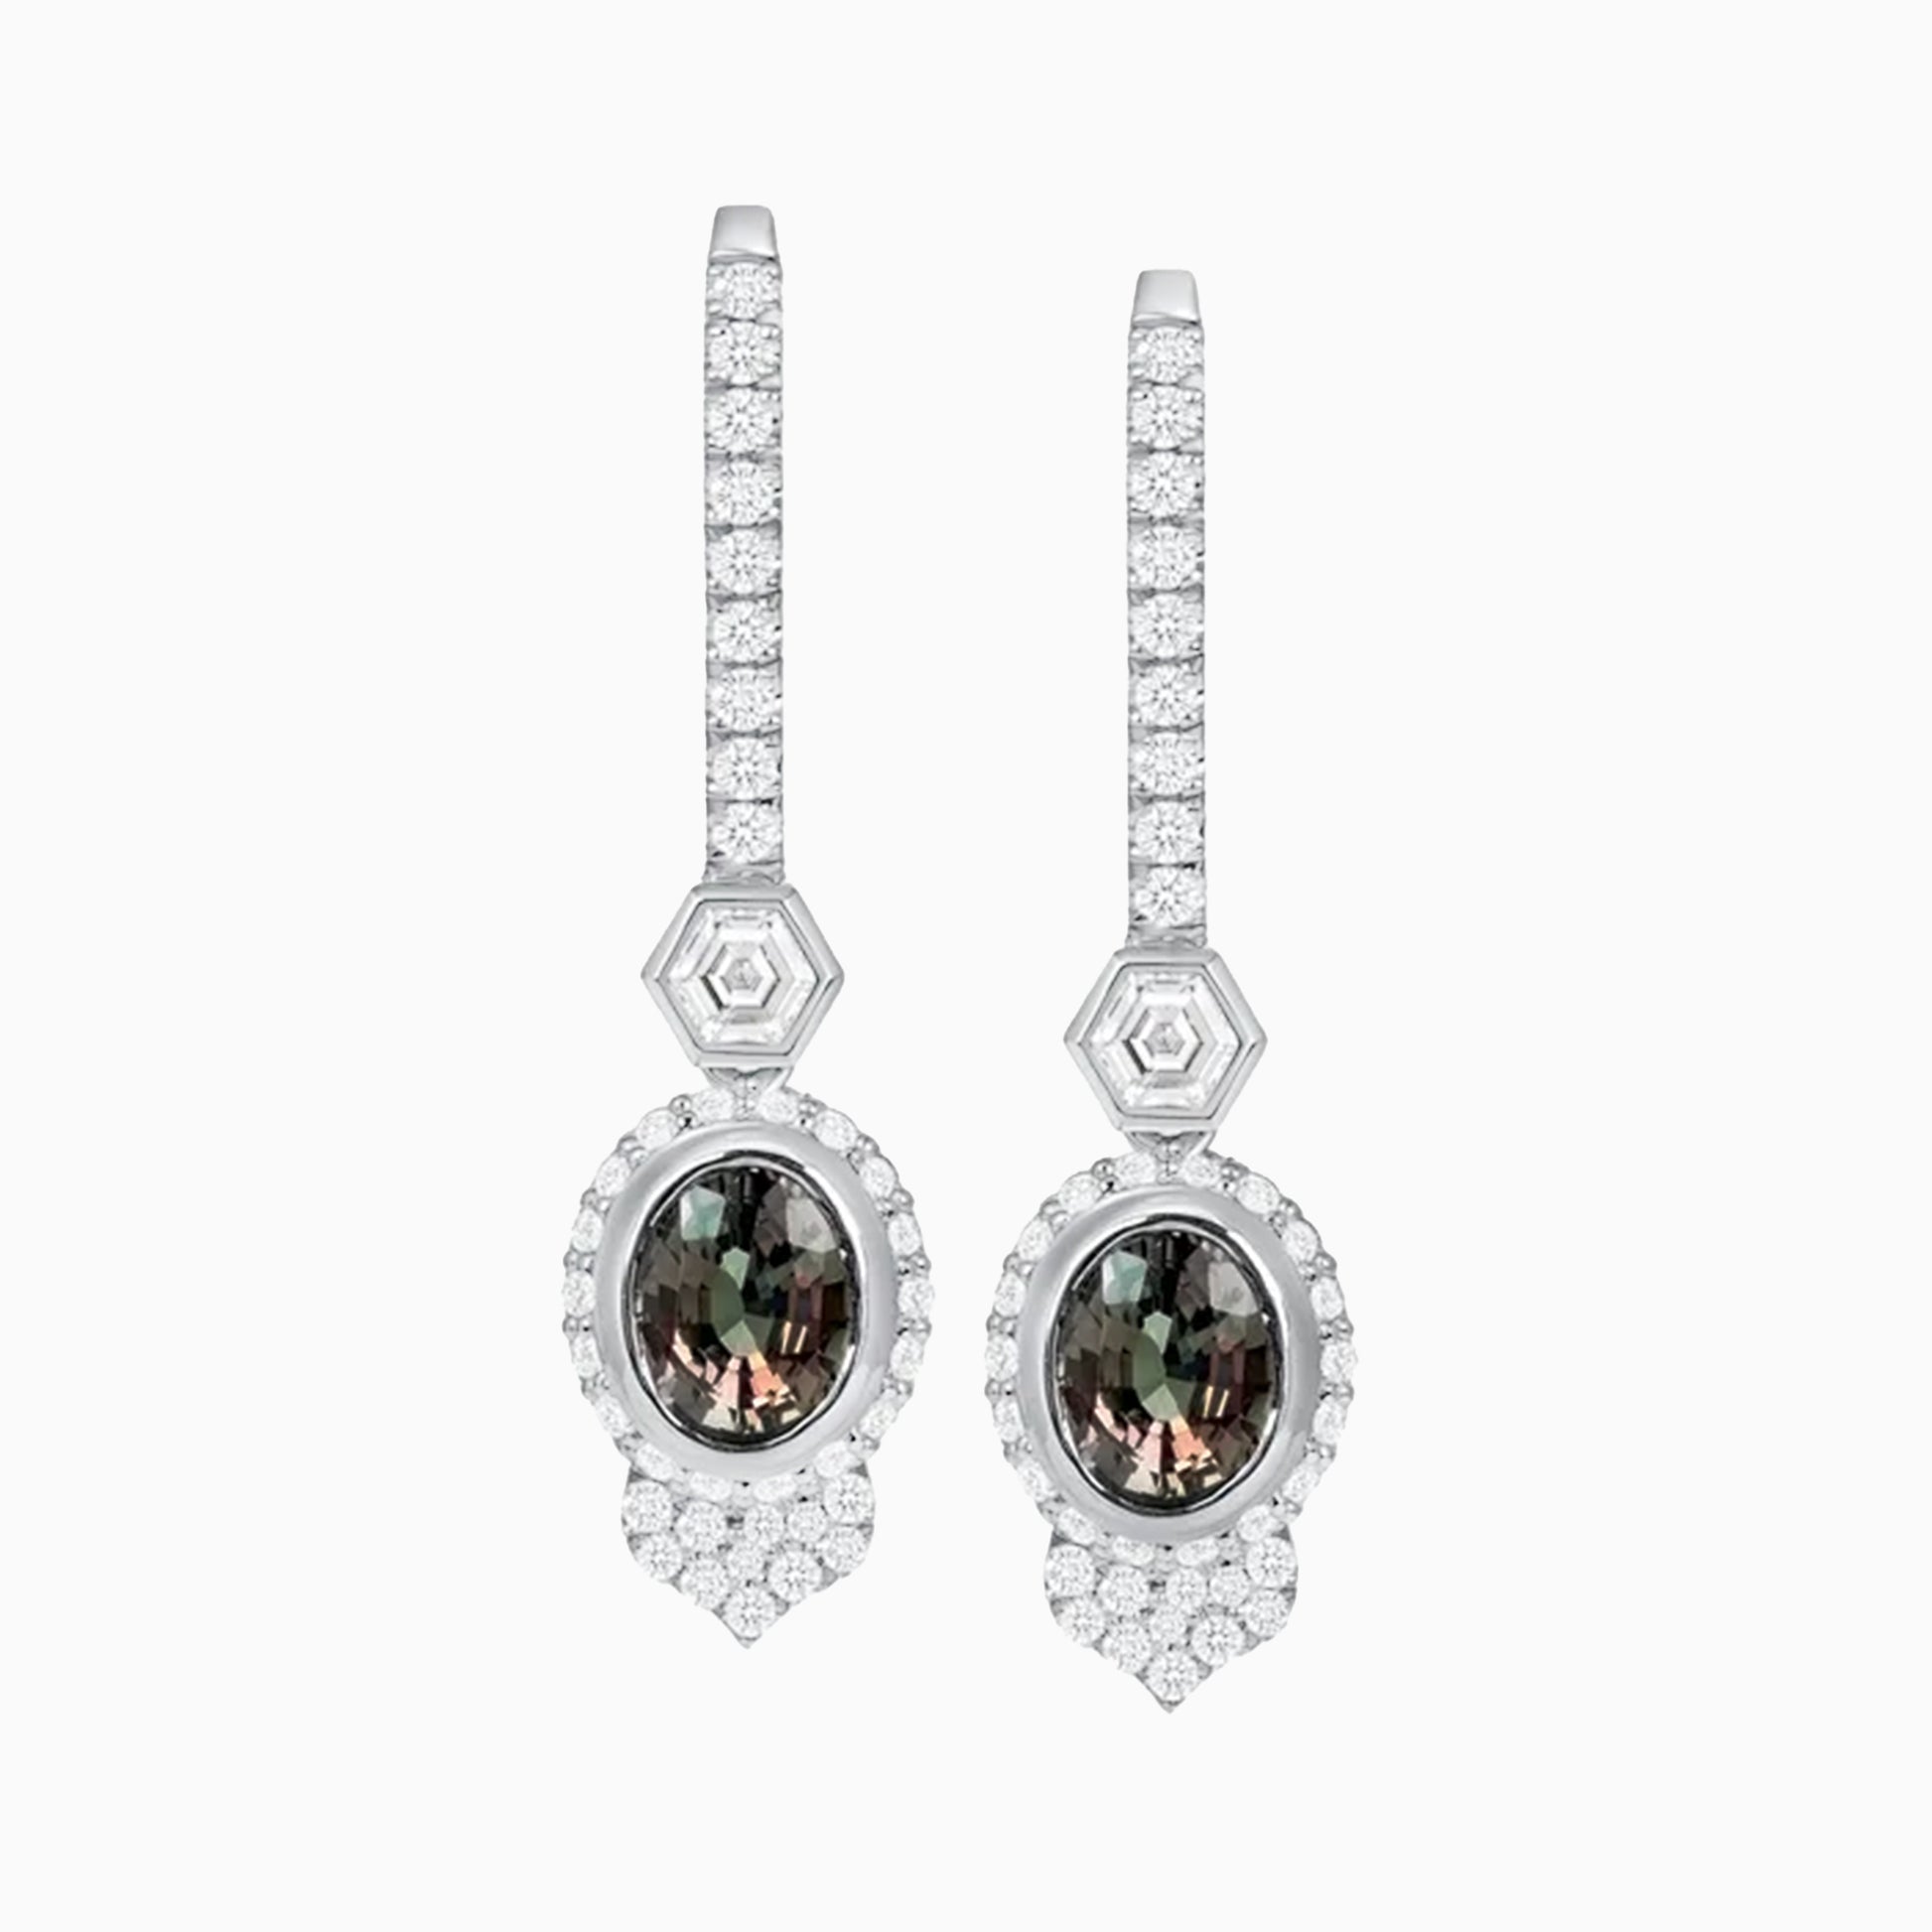 Alexandrite and Diamonds Platinum Earrings on a white background